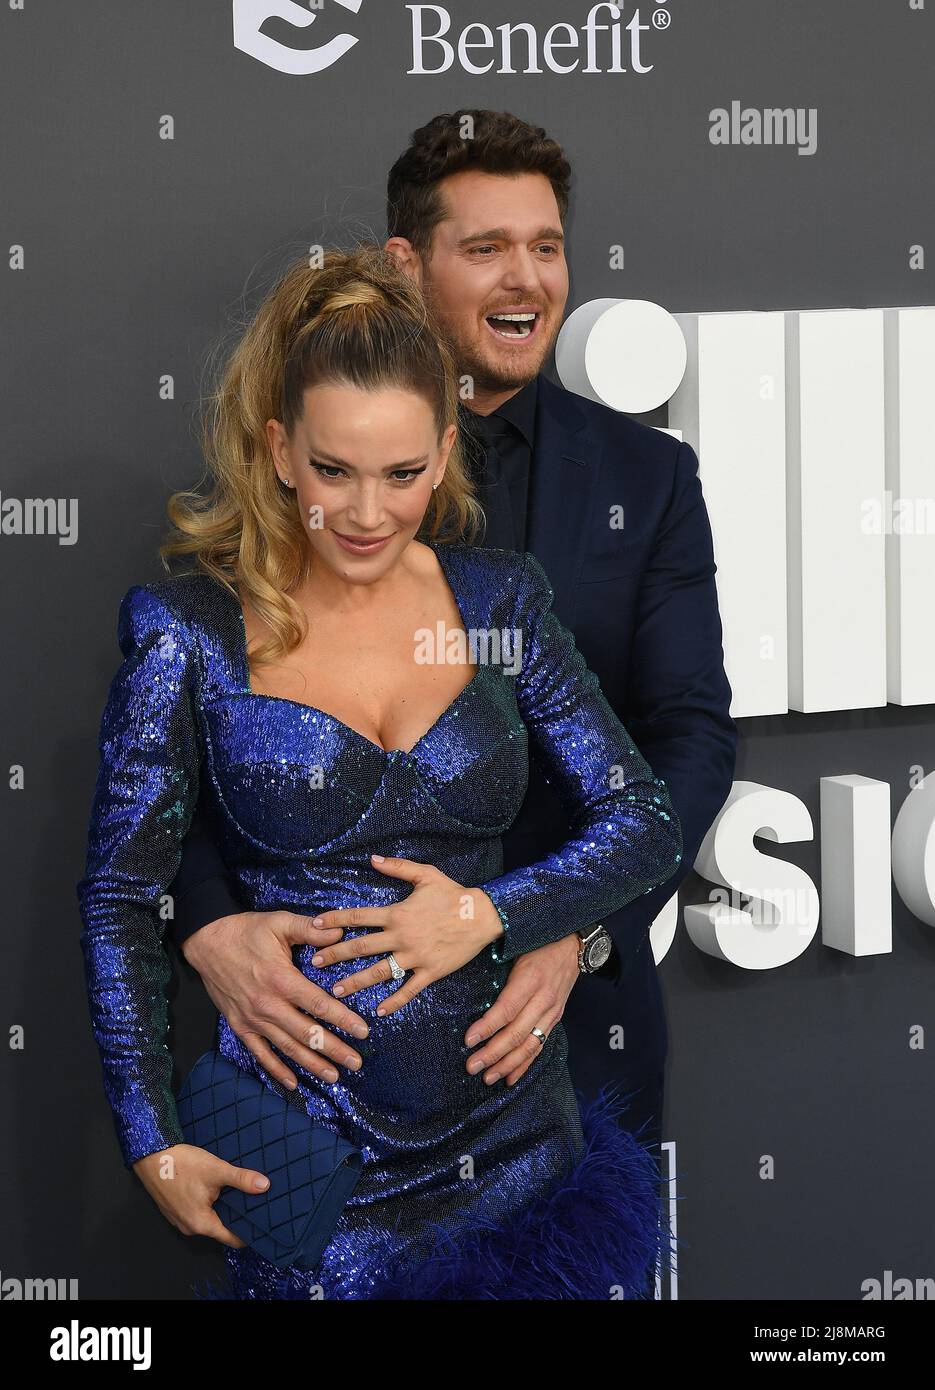 Las Vegas, Nevada, May 15, 2022, Michael Buble and Luisana Lopilato attends the 2022 Billboard Music Awards at MGM Grand Garden Arena on May 15, 2022 in Las Vegas, Nevada. Photo: Casey Flanigan/imageSPACE/MediaPunch Stock Photo